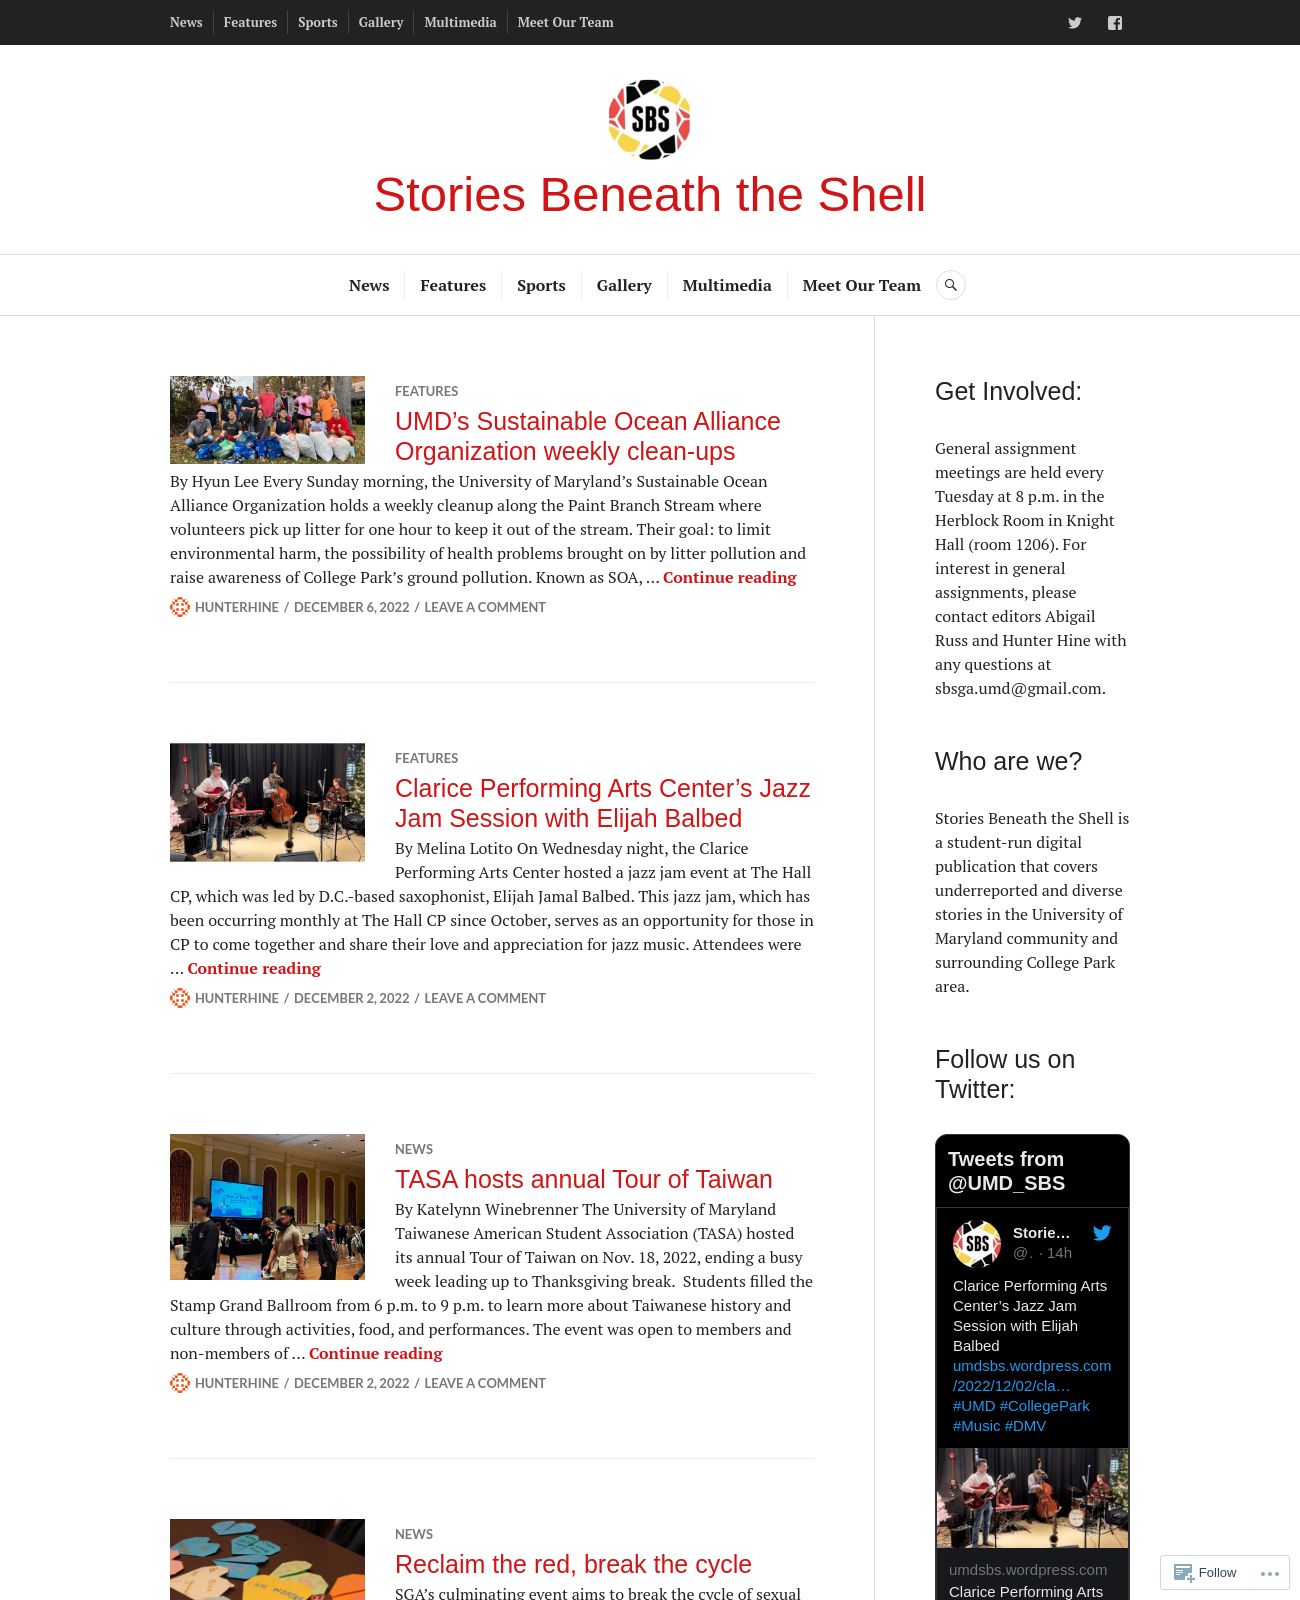 Stories Beneath the Shell